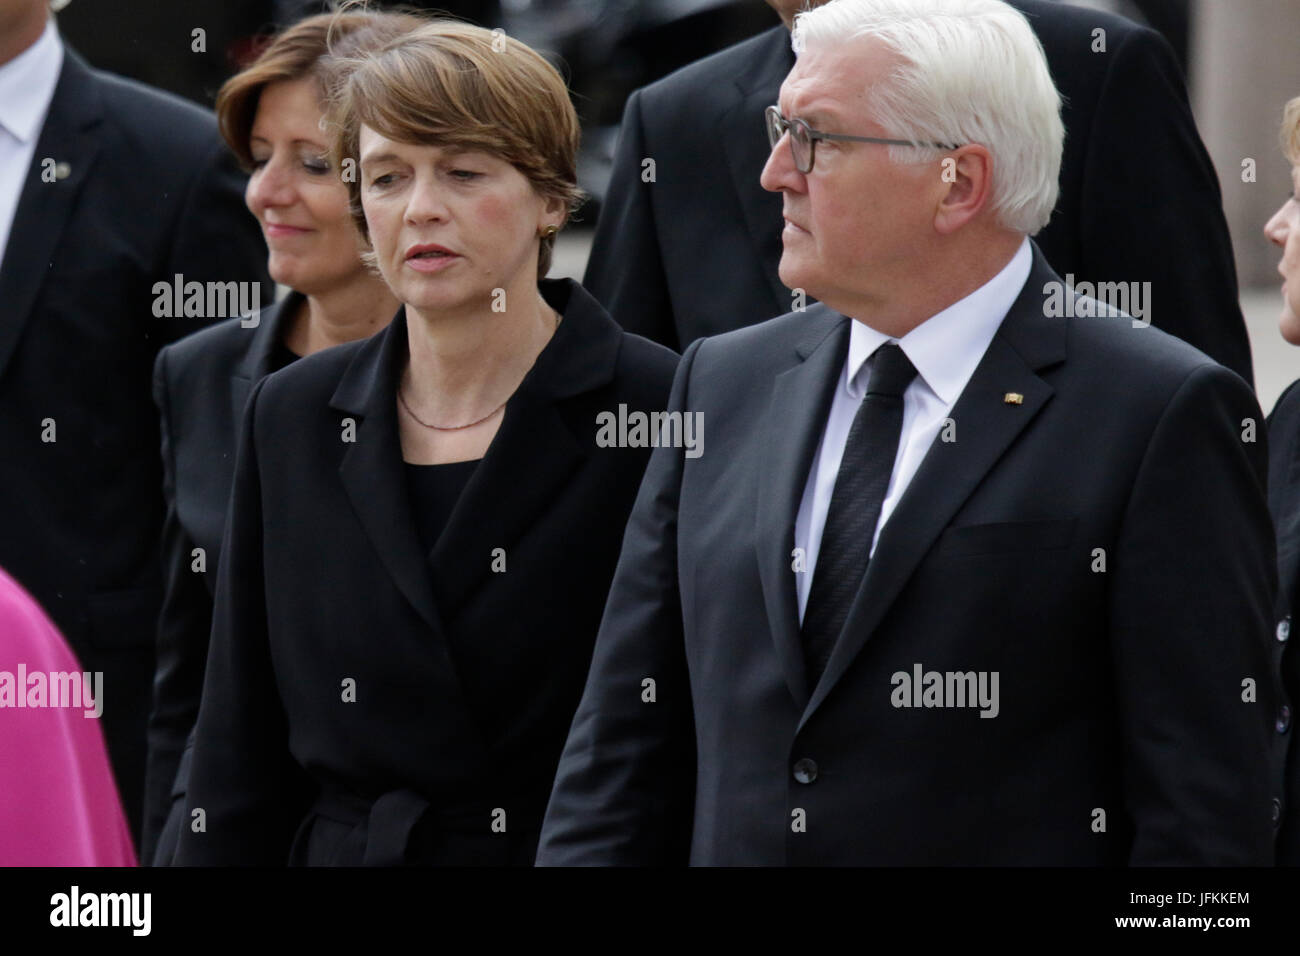 Speyer, Germany. 1st July 2017. Frank-Walter Steinmeier (right), the President of Germany, and his wife Elke Budenbender (left), walk to the Speyer Cathedral,  A funeral mass for the former German Chancellor Helmut Kohl was held in the Cathedral of Speyer. it was attended by over 100 invited guests and several thousand people followed the mass outside the Cathedral. Stock Photo